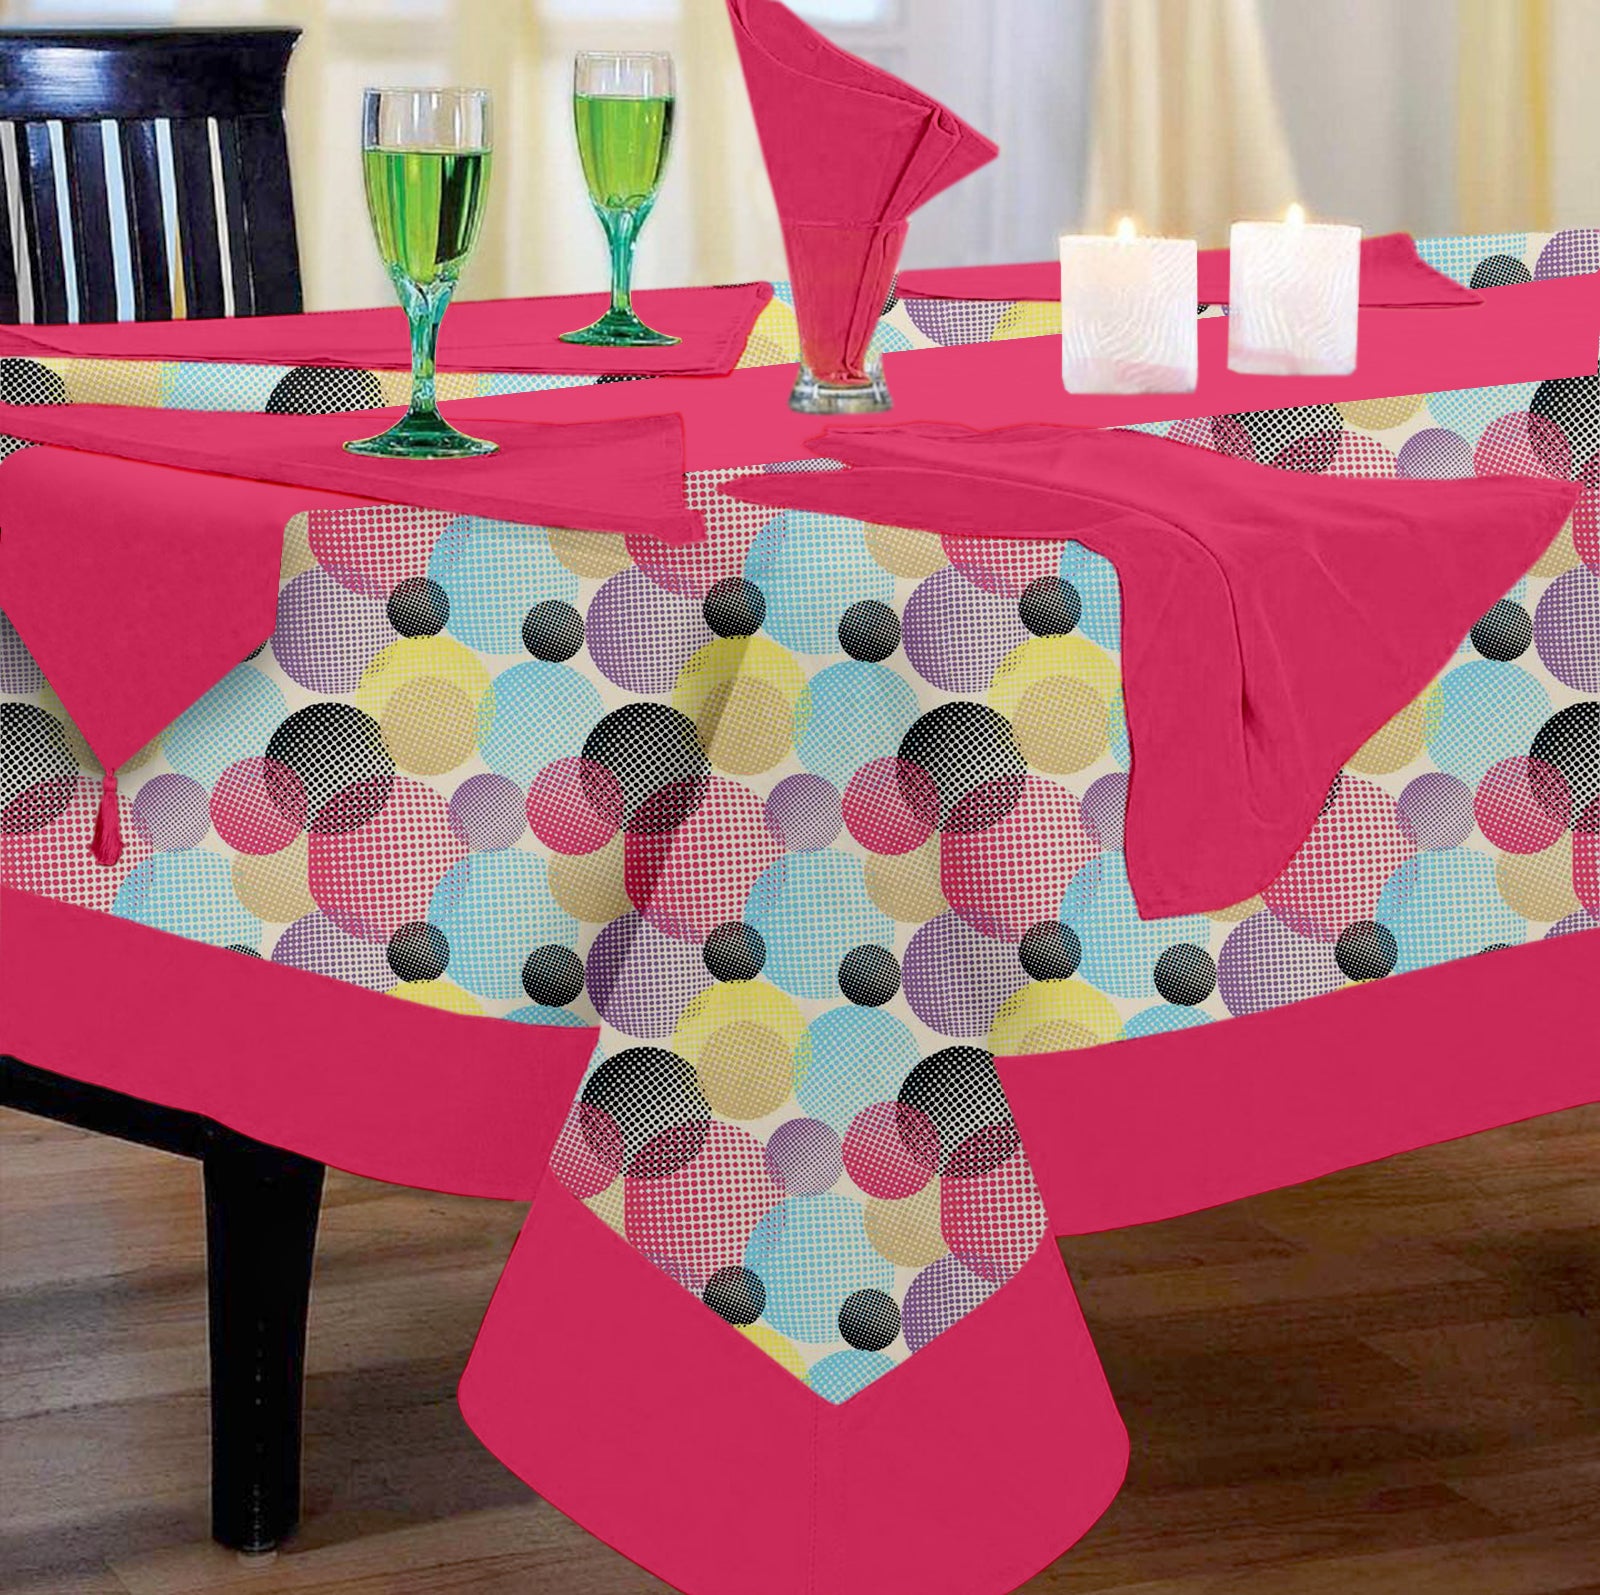 Lushomes dining table cover 6 seater set, Circles Printed 6 Seater Table Linen Set, Home Decor Items (1 Table Cloth 60 x 90 inches + 1 Runner in Size 12x102 Inches+ 6 Napkins in Size 17x17 Inches)